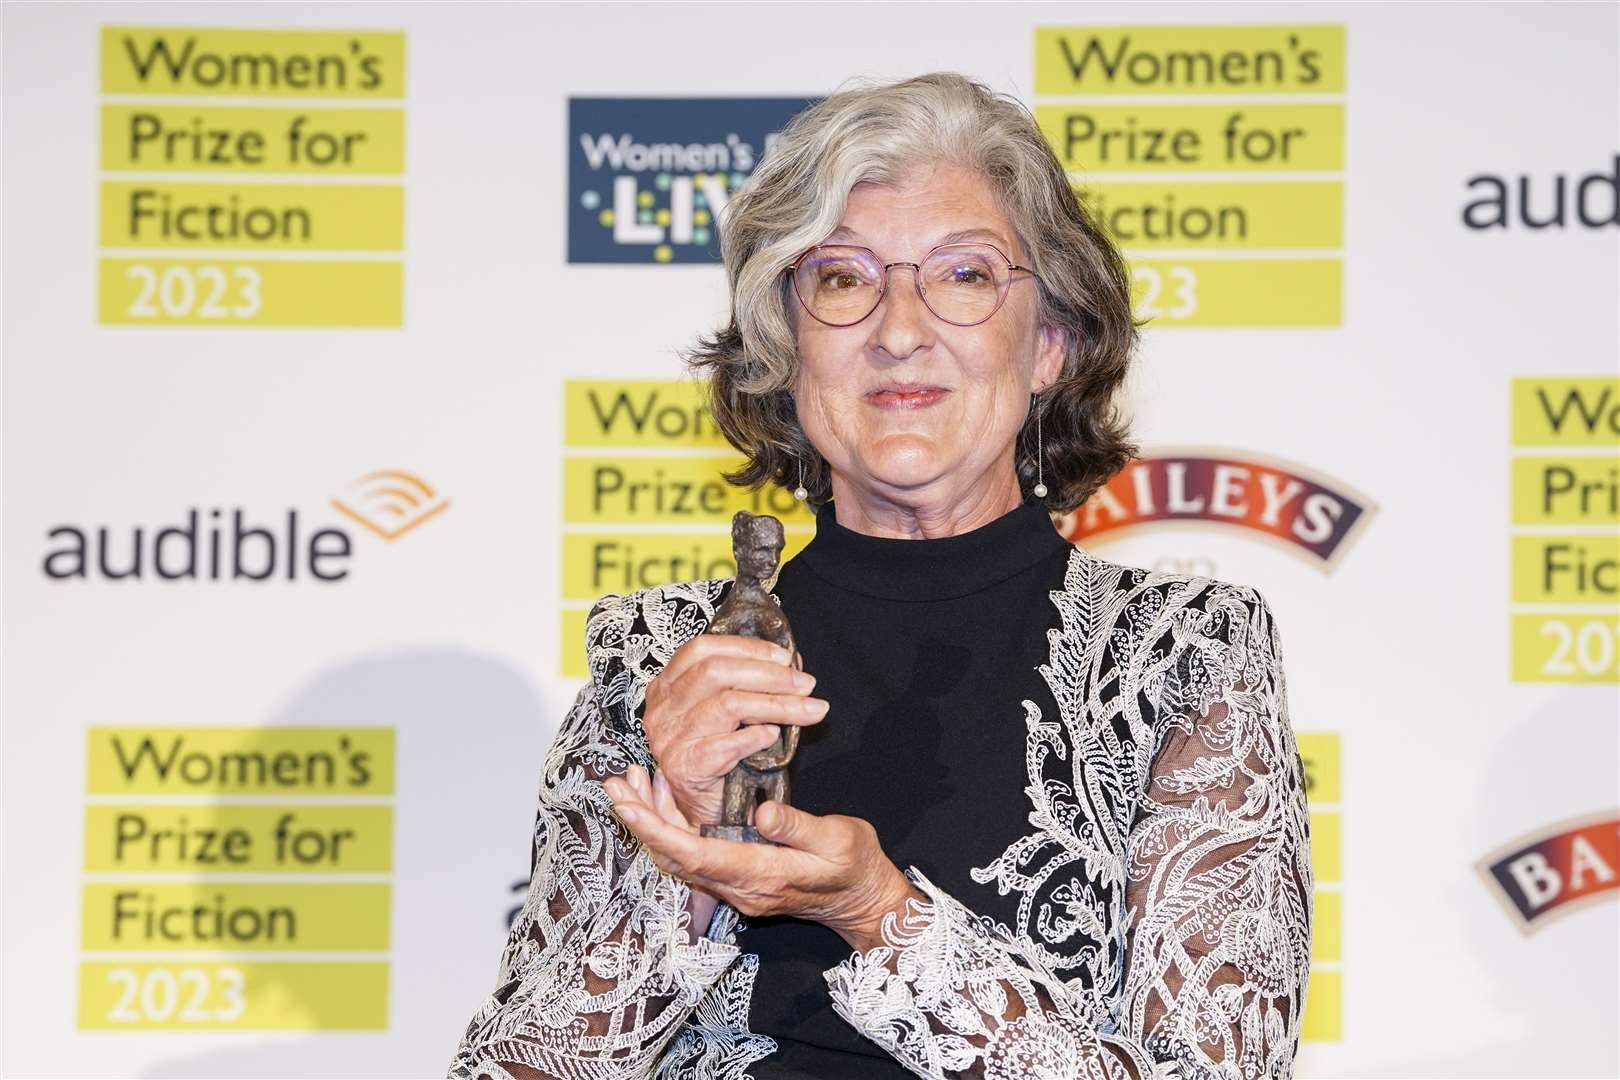 Barbara Kingsolver said she is happy that her readers will follow her ‘wherever I go in a literary way’ following her historic win (Ian West/PA)